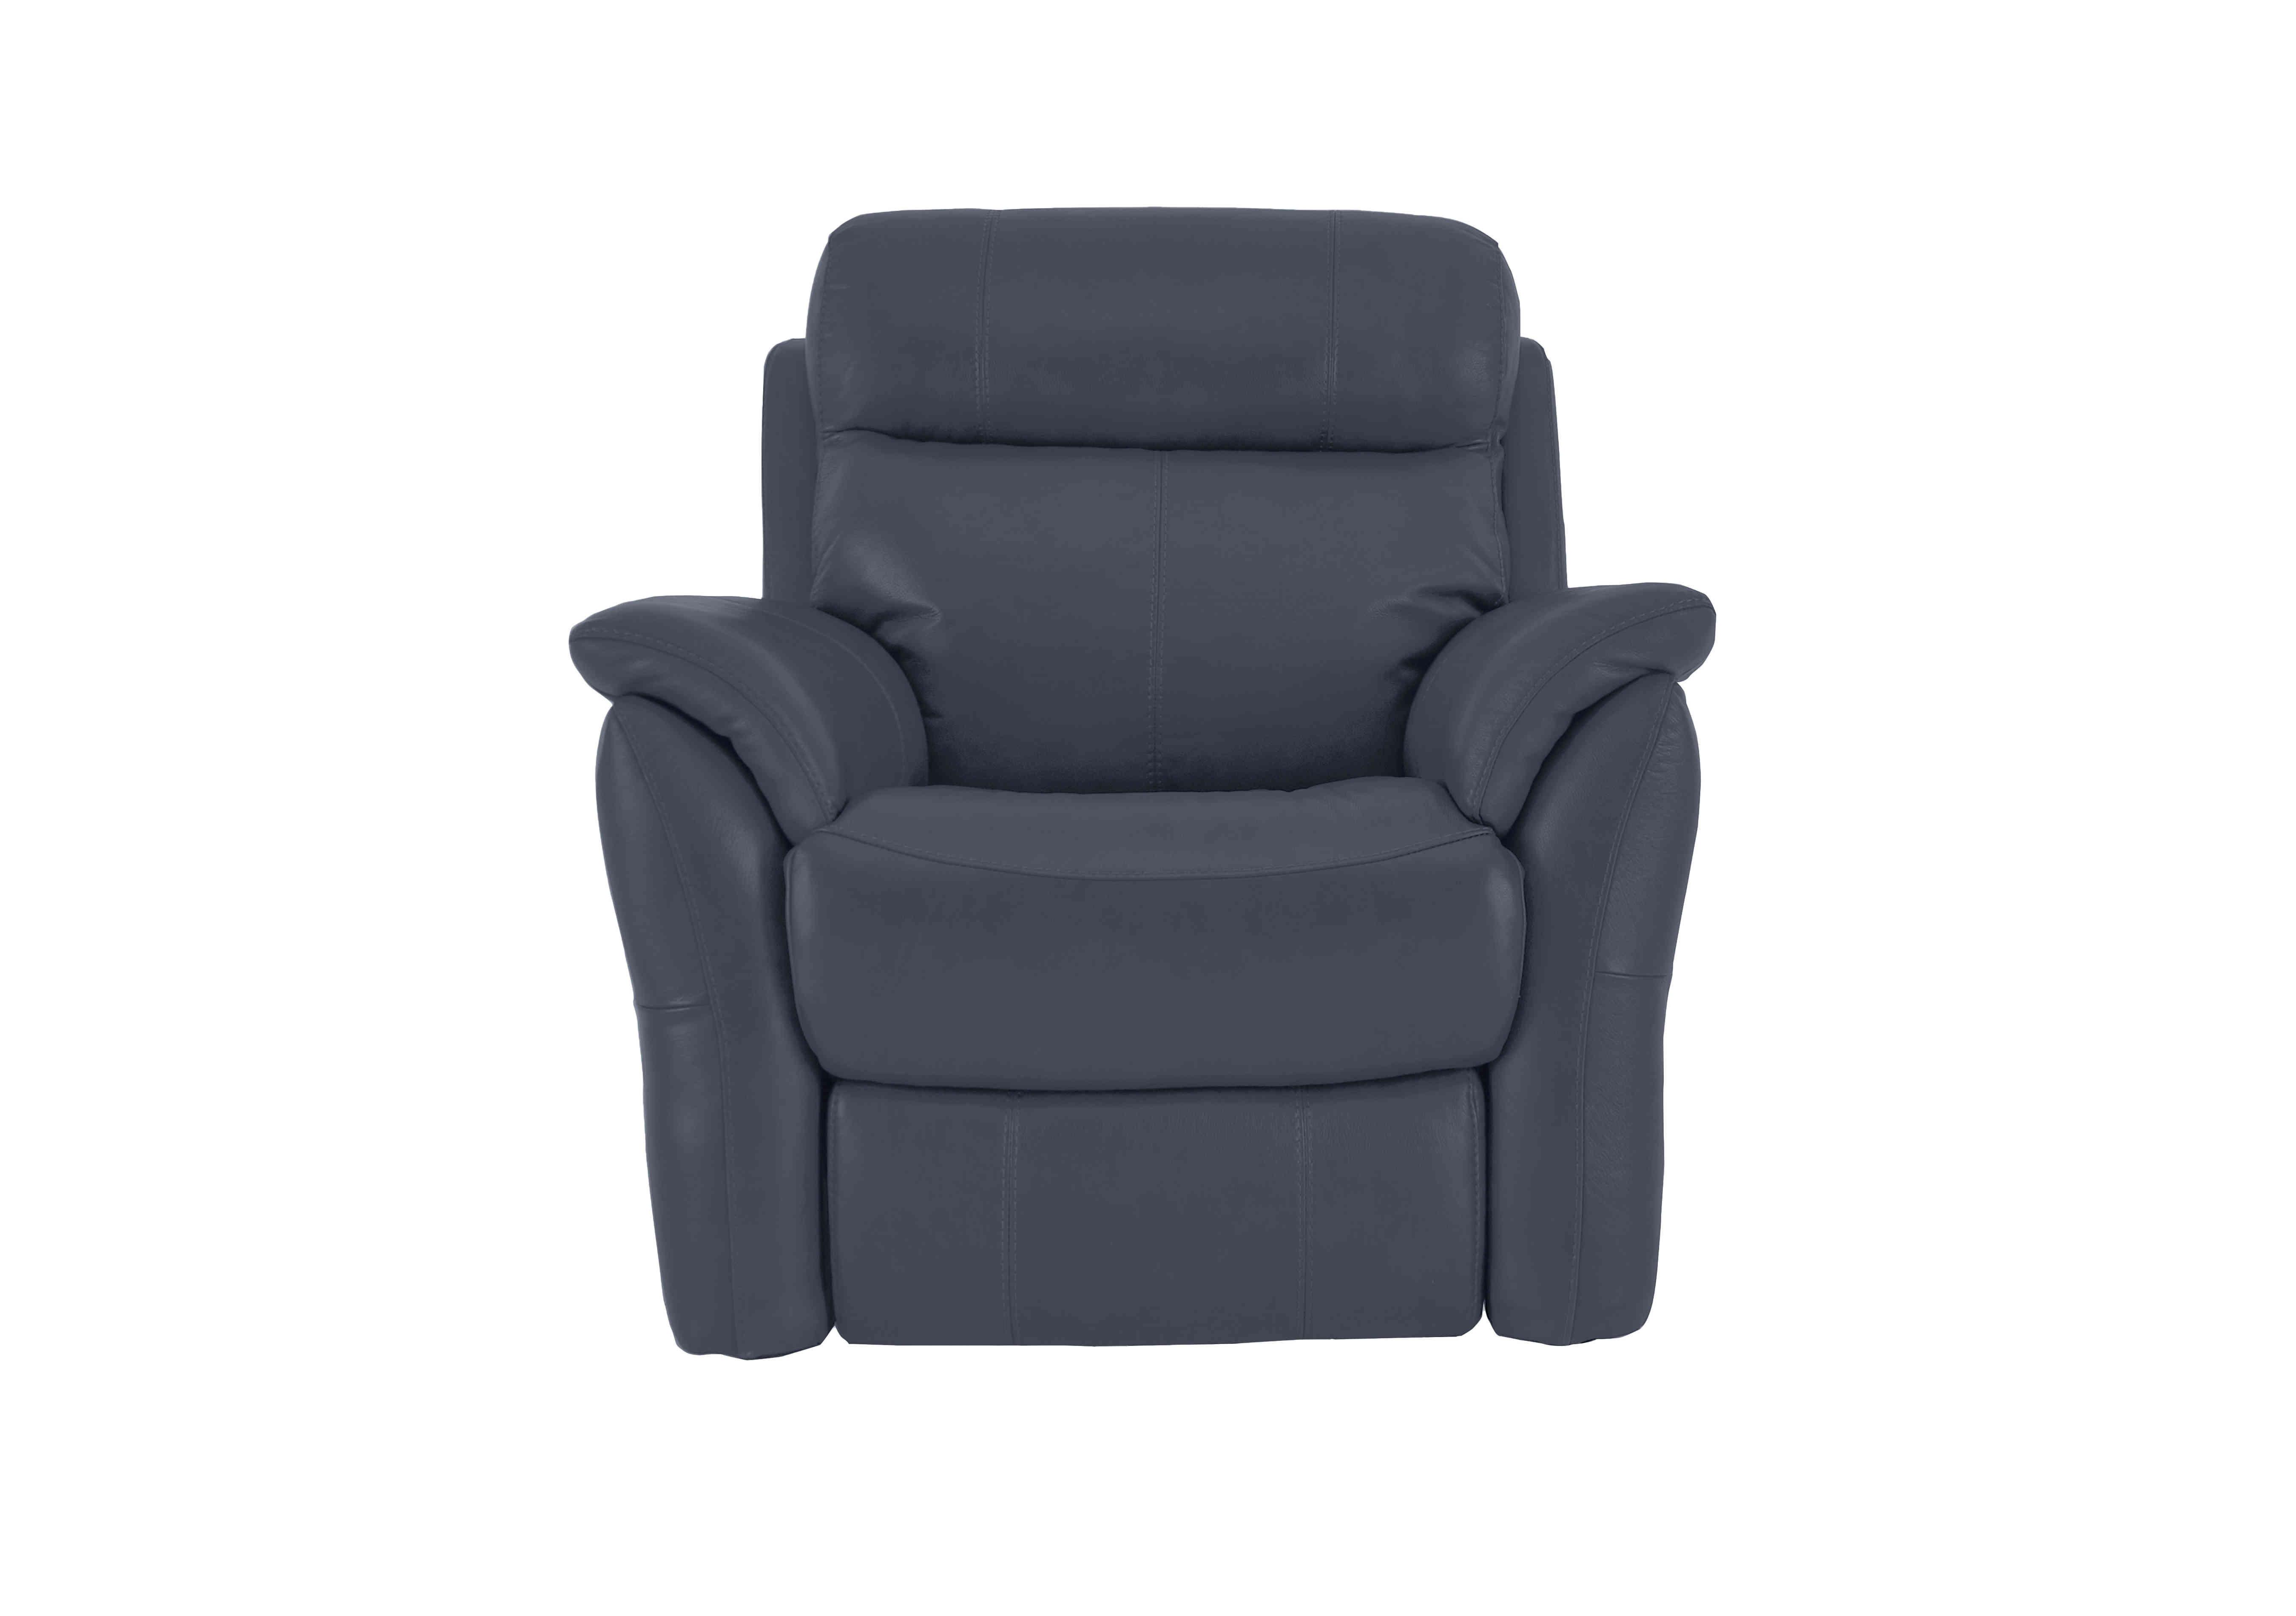 Relax Station Revive Leather Armchair in Bv-313e Ocean Blue on Furniture Village